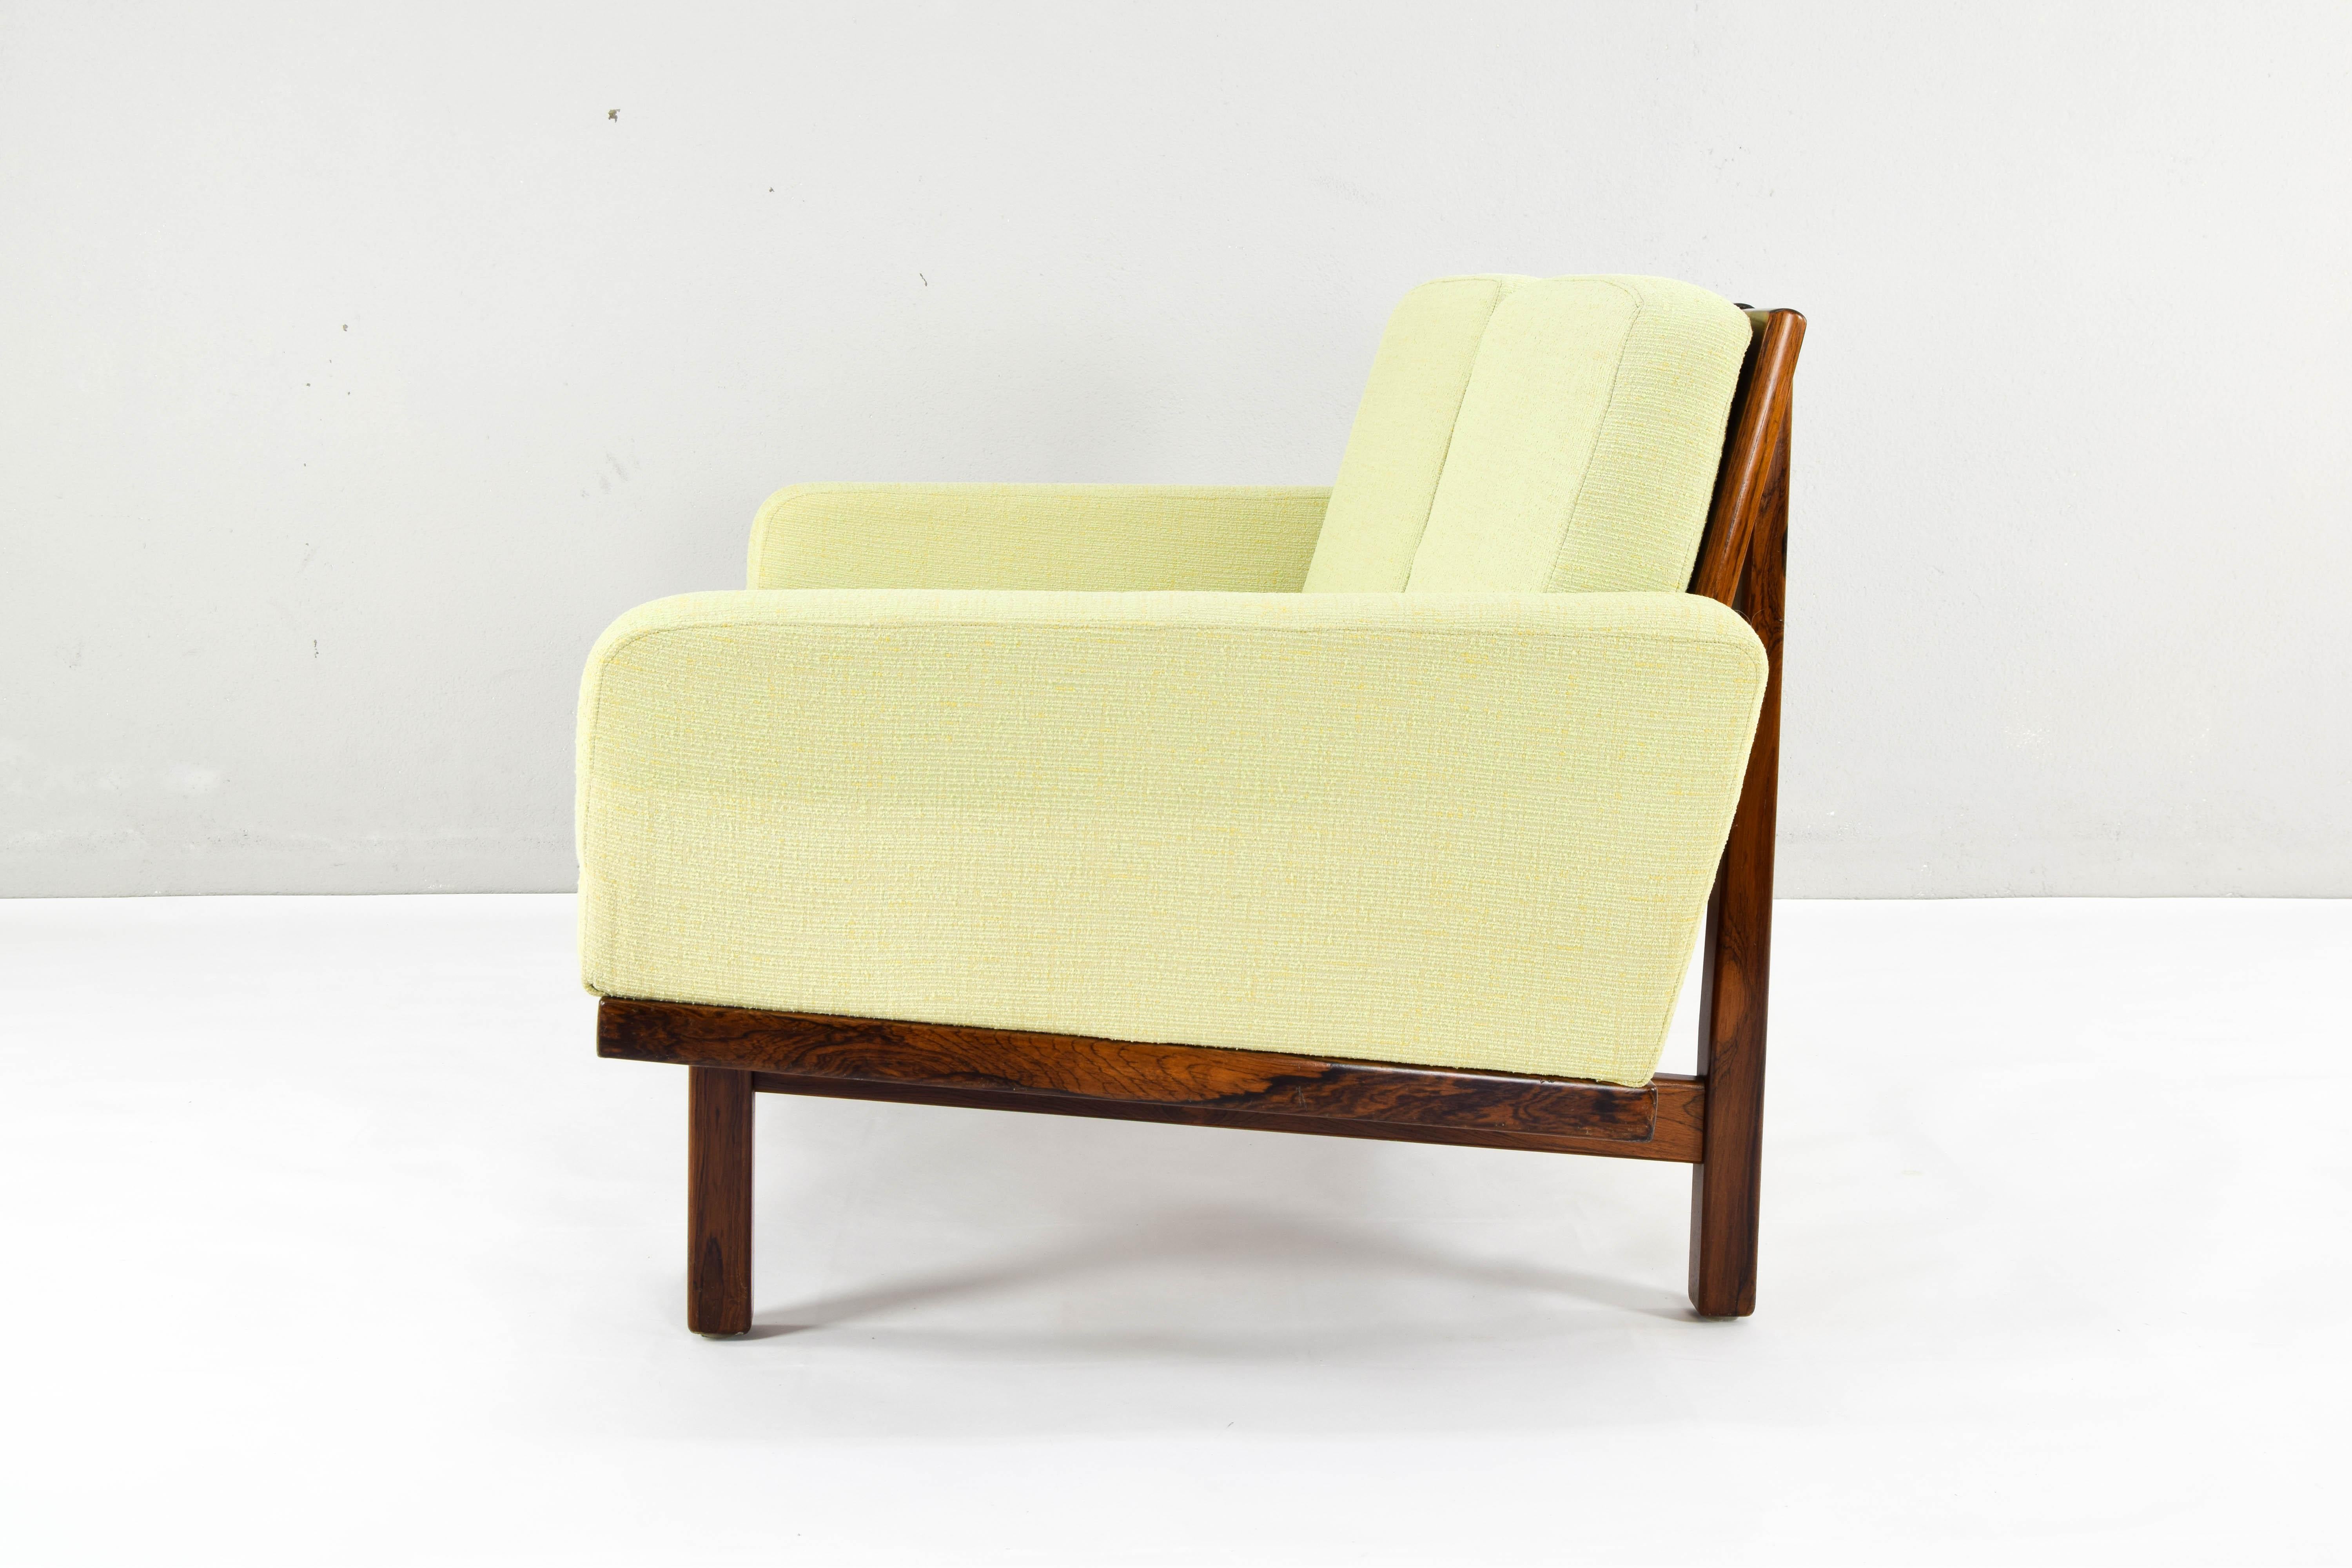 60s style couch